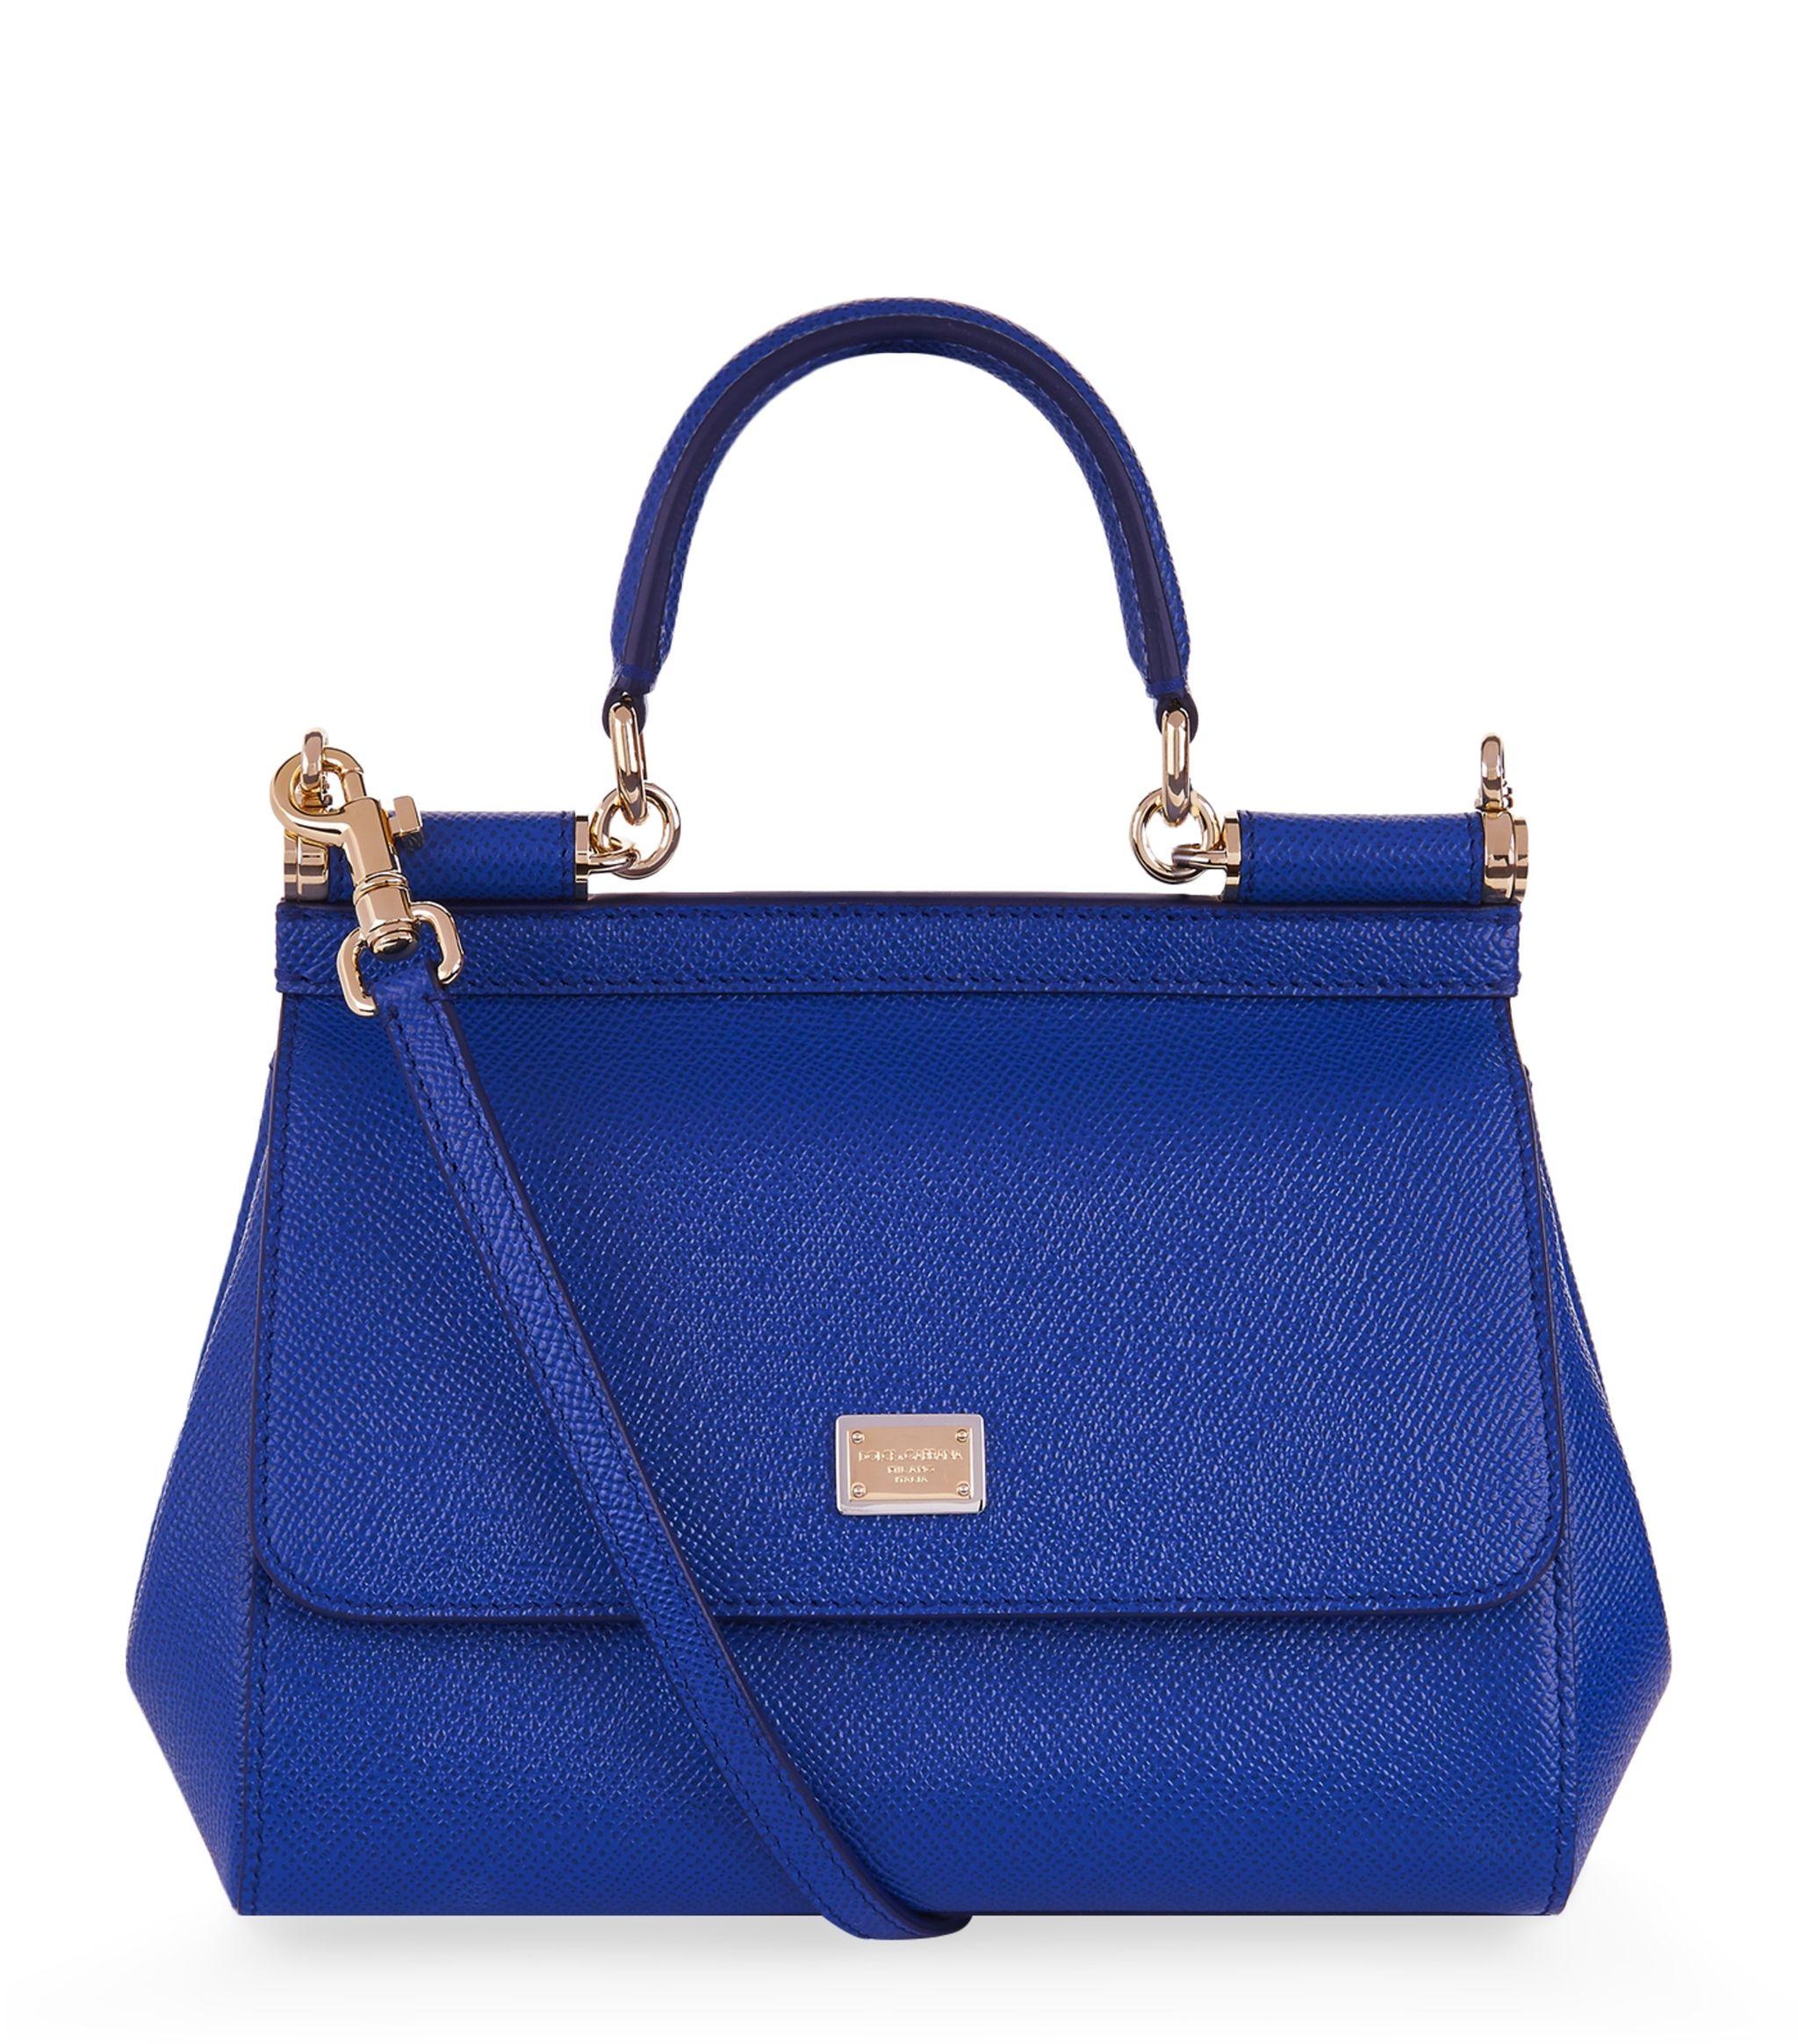 Dolce & Gabbana Leather Miss Sicily Bag - Blue Handle Bags